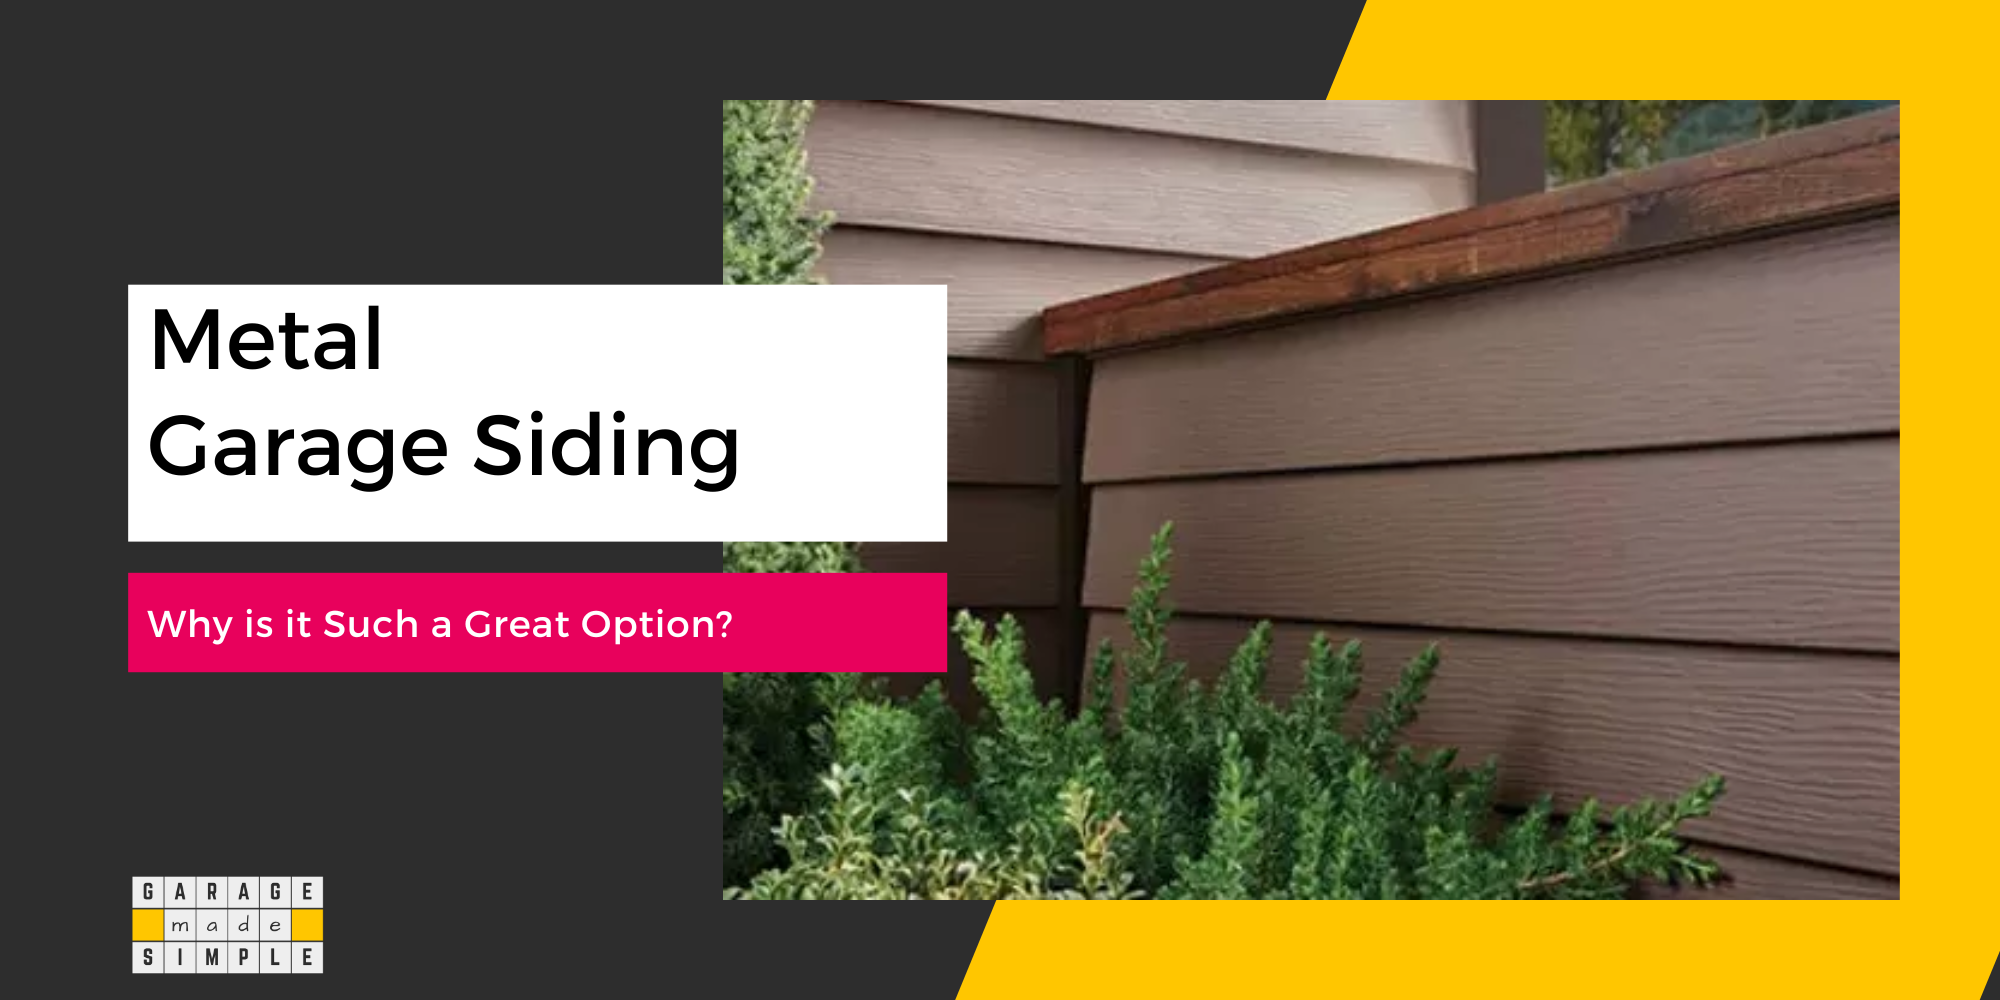 Metal Garage Siding: Why is it Such a Great Option?